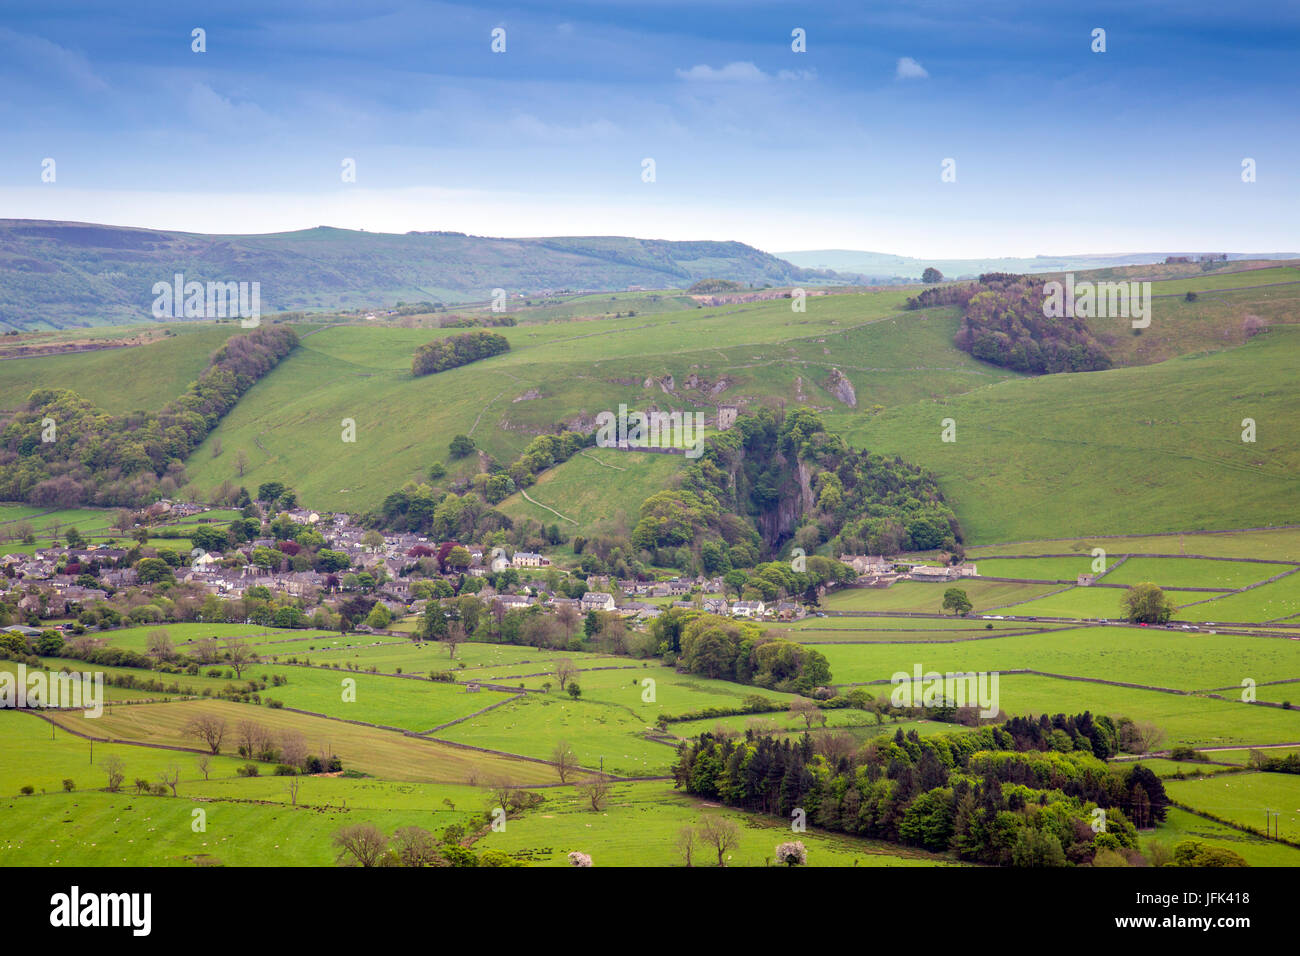 Castleton Village and Peveril Castle viewed from the Great Ridge, Peak District, Derbyshire, England, UK Stock Photo